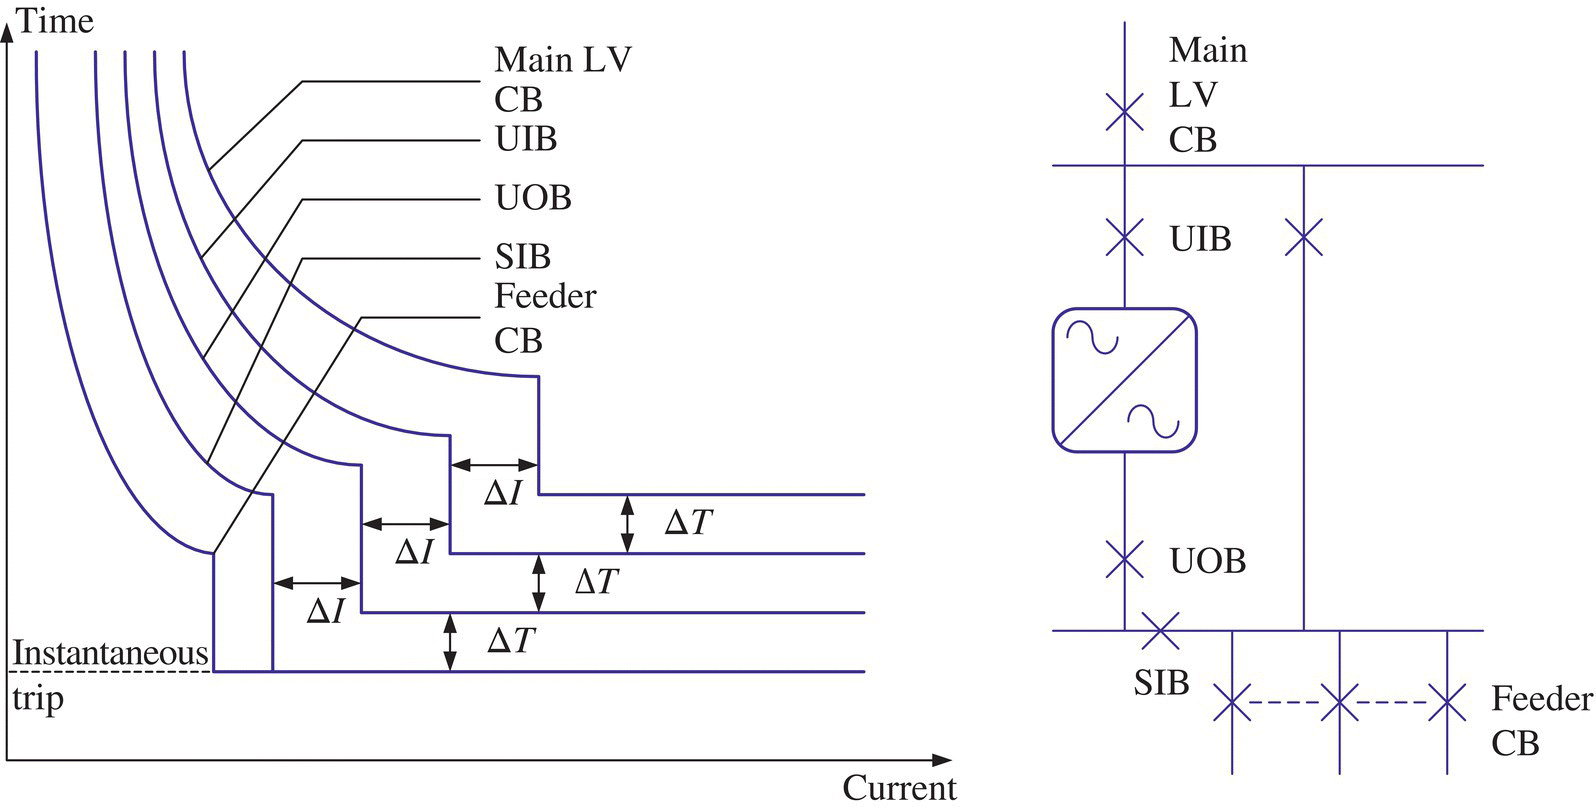 Schematic illustration of time-graded selectivity between LV ACB.